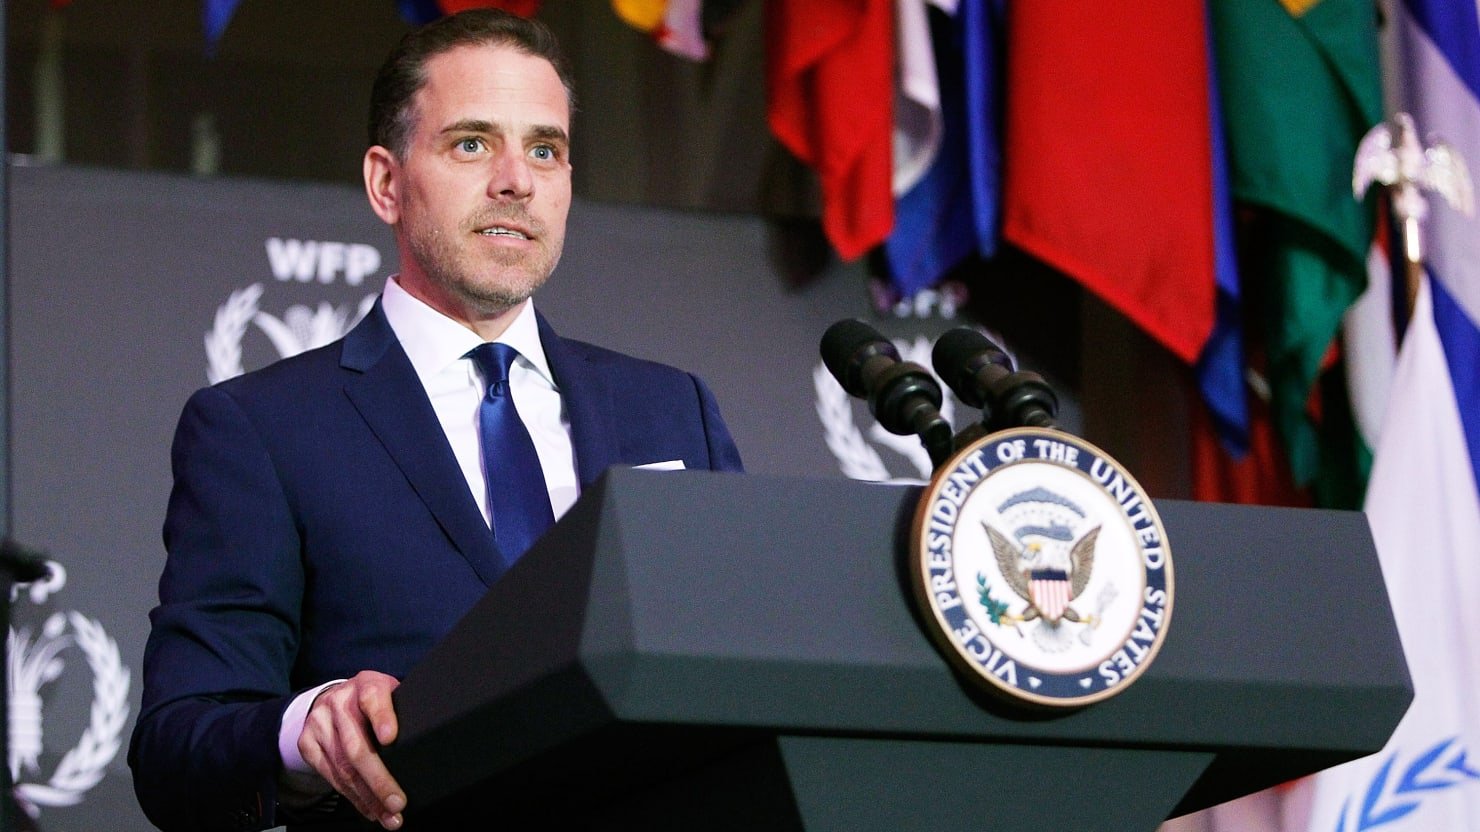 Trumpworld Thinks Hunter Biden’s Addiction Is Funny. They’re About to Be the Punchline.